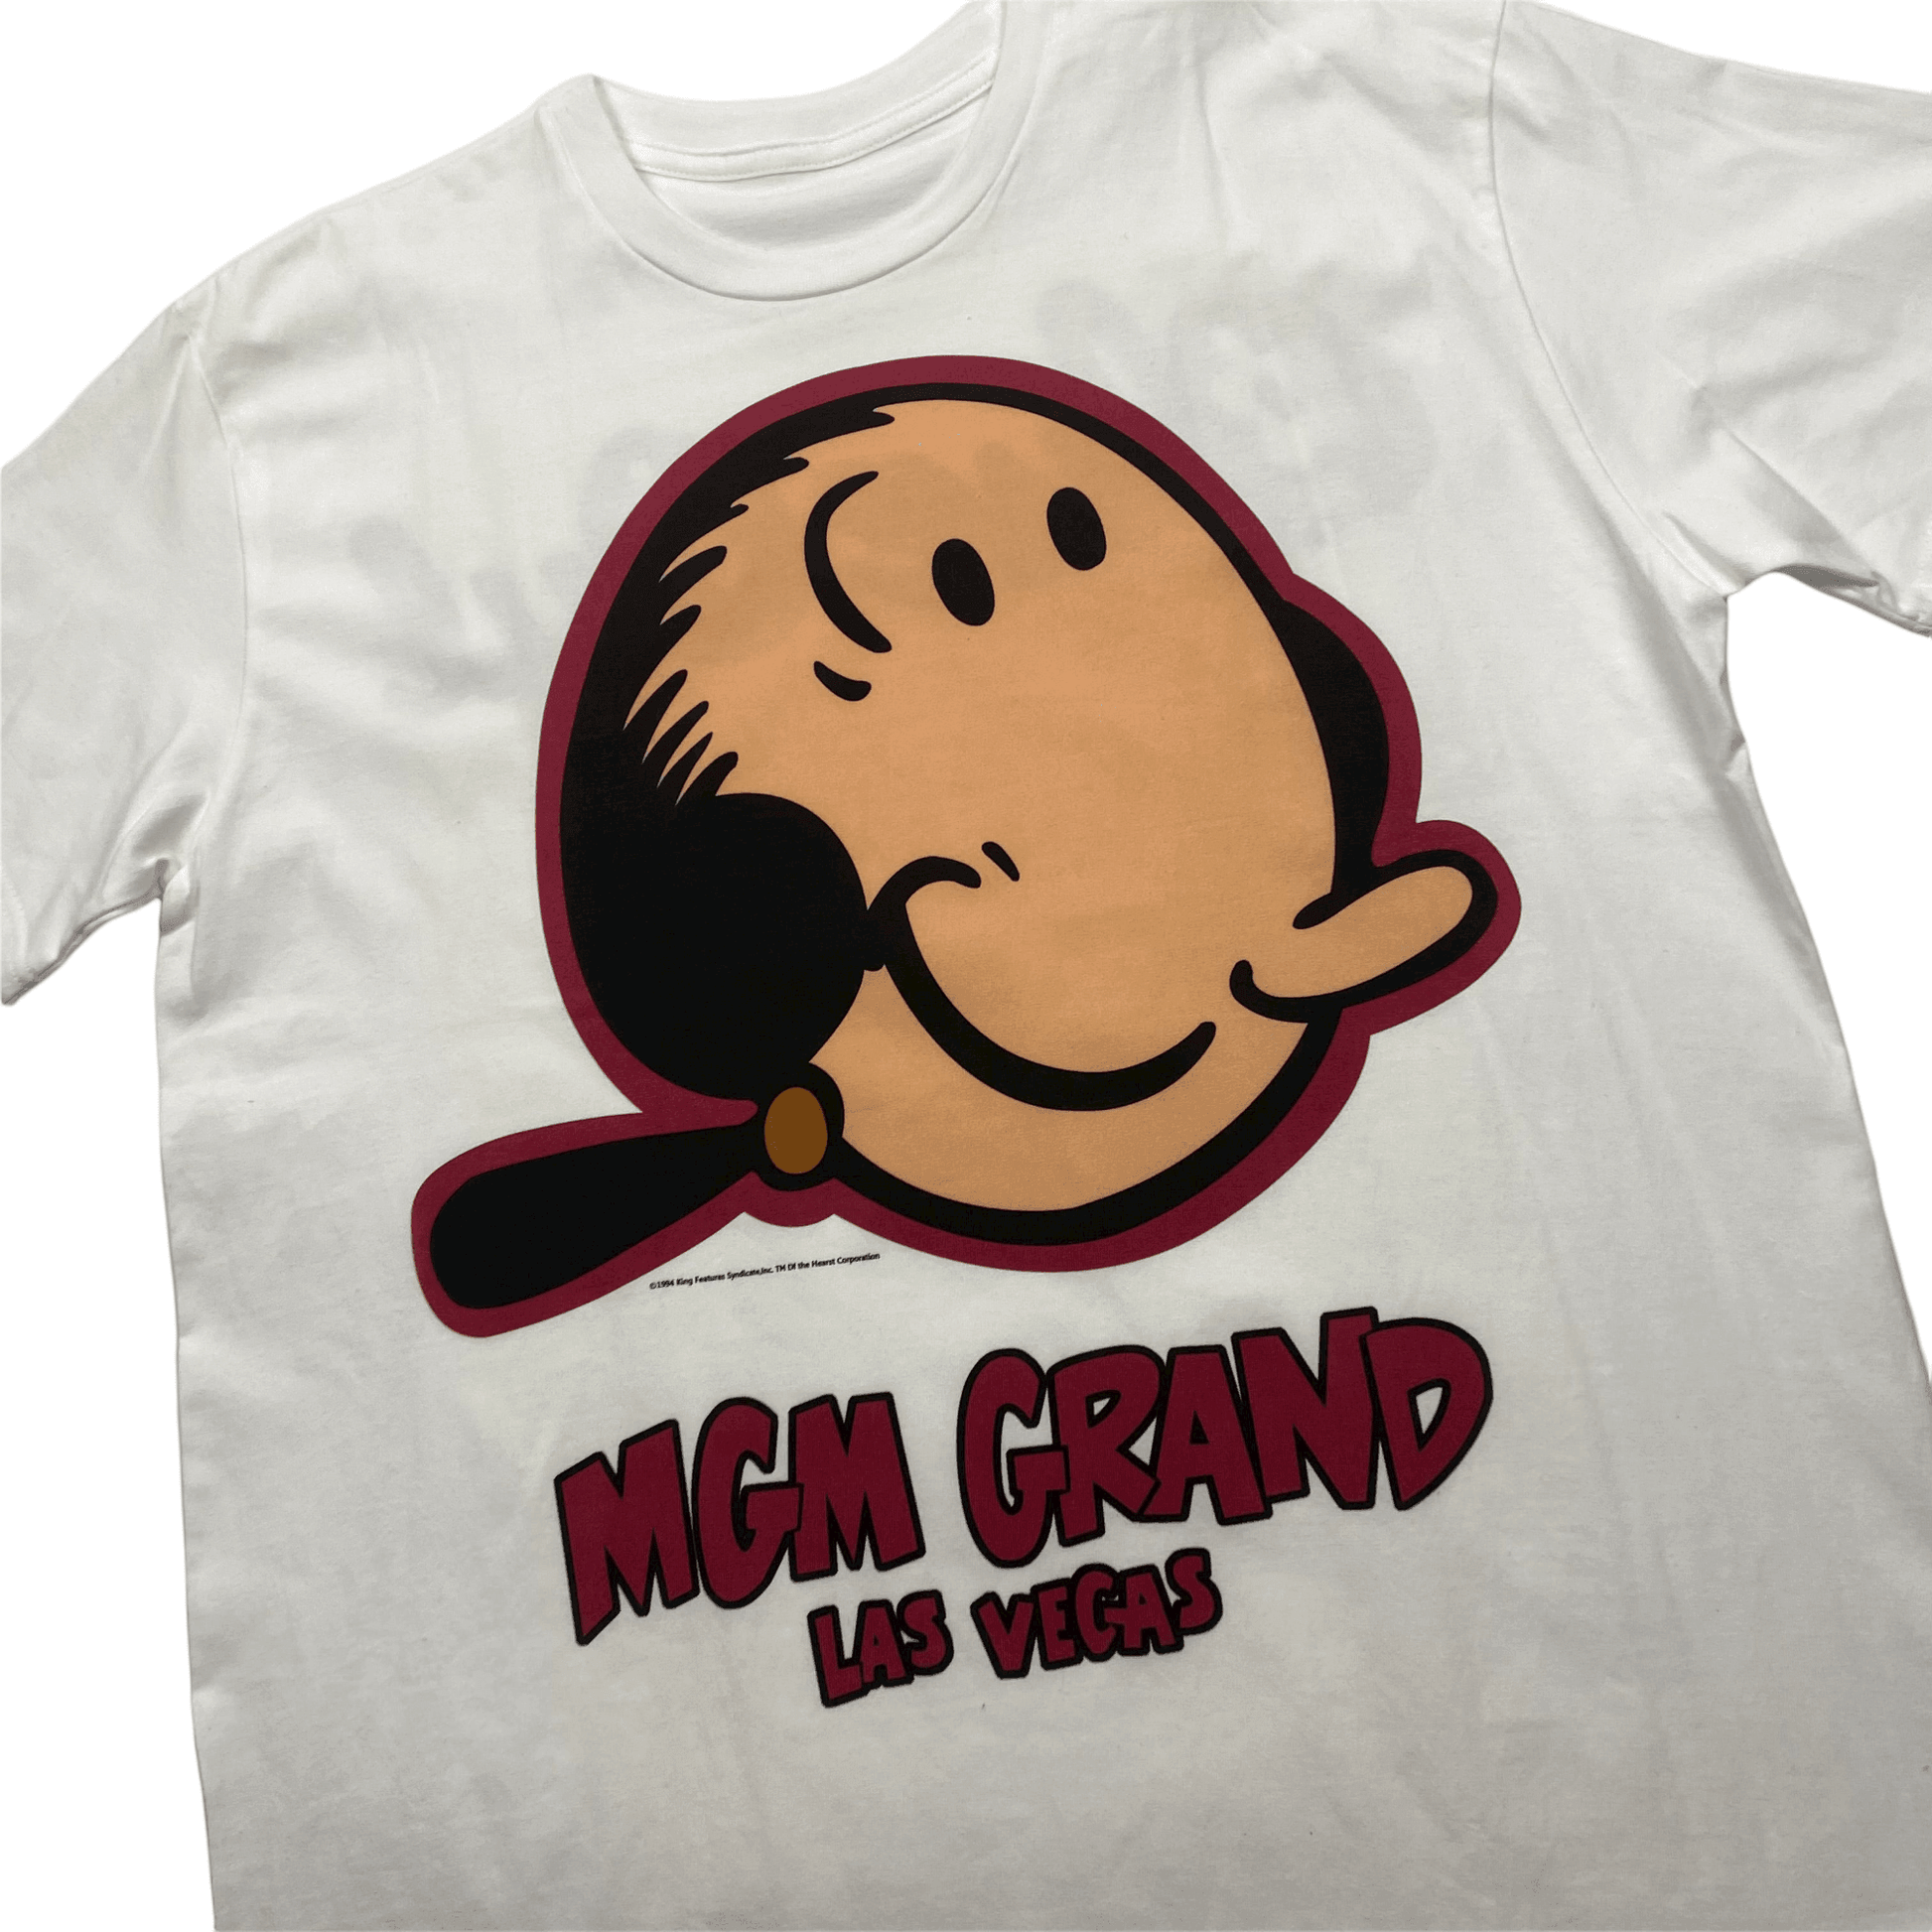 Vintage 90s White MGM Grand Las Vegas Graphic Tee - Extra Large - The Streetwear Studio